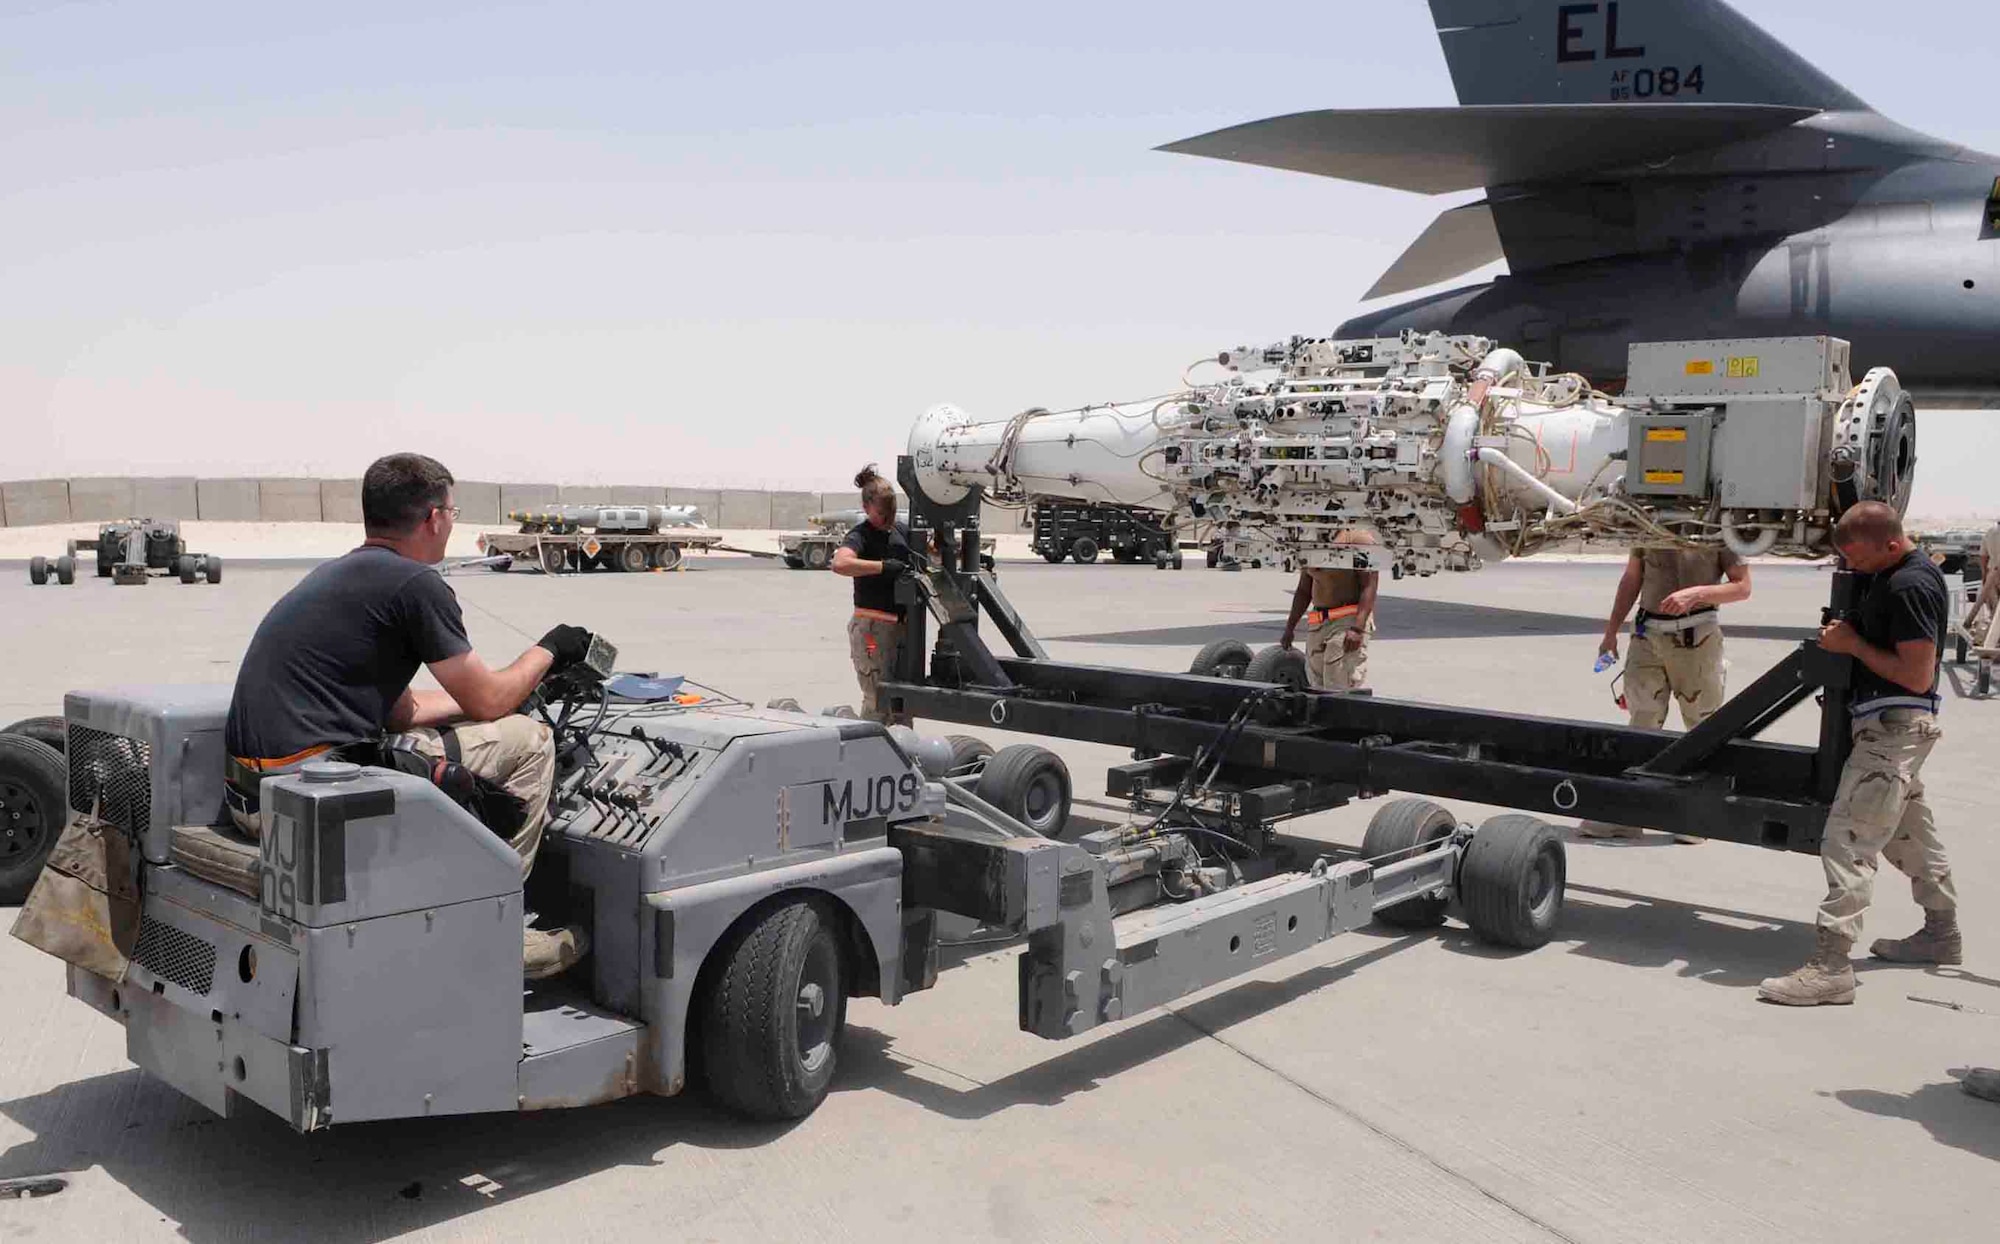 Staff Sgt. Jacob Sherwood operates a MJ-40 bomb lift truck while Airman 1st Class Emily Stettler and Airman 1st Class Thomas J. Howe secure a conventional rotary launcher before loading it onto a B1 aircraft. They are assigned with 379th Expeditionary Aircraft Maintenance Squadron and deployed from Ellsworth Air Force Base, S.D. (Tech. Sgt. Johnny Saldivar)